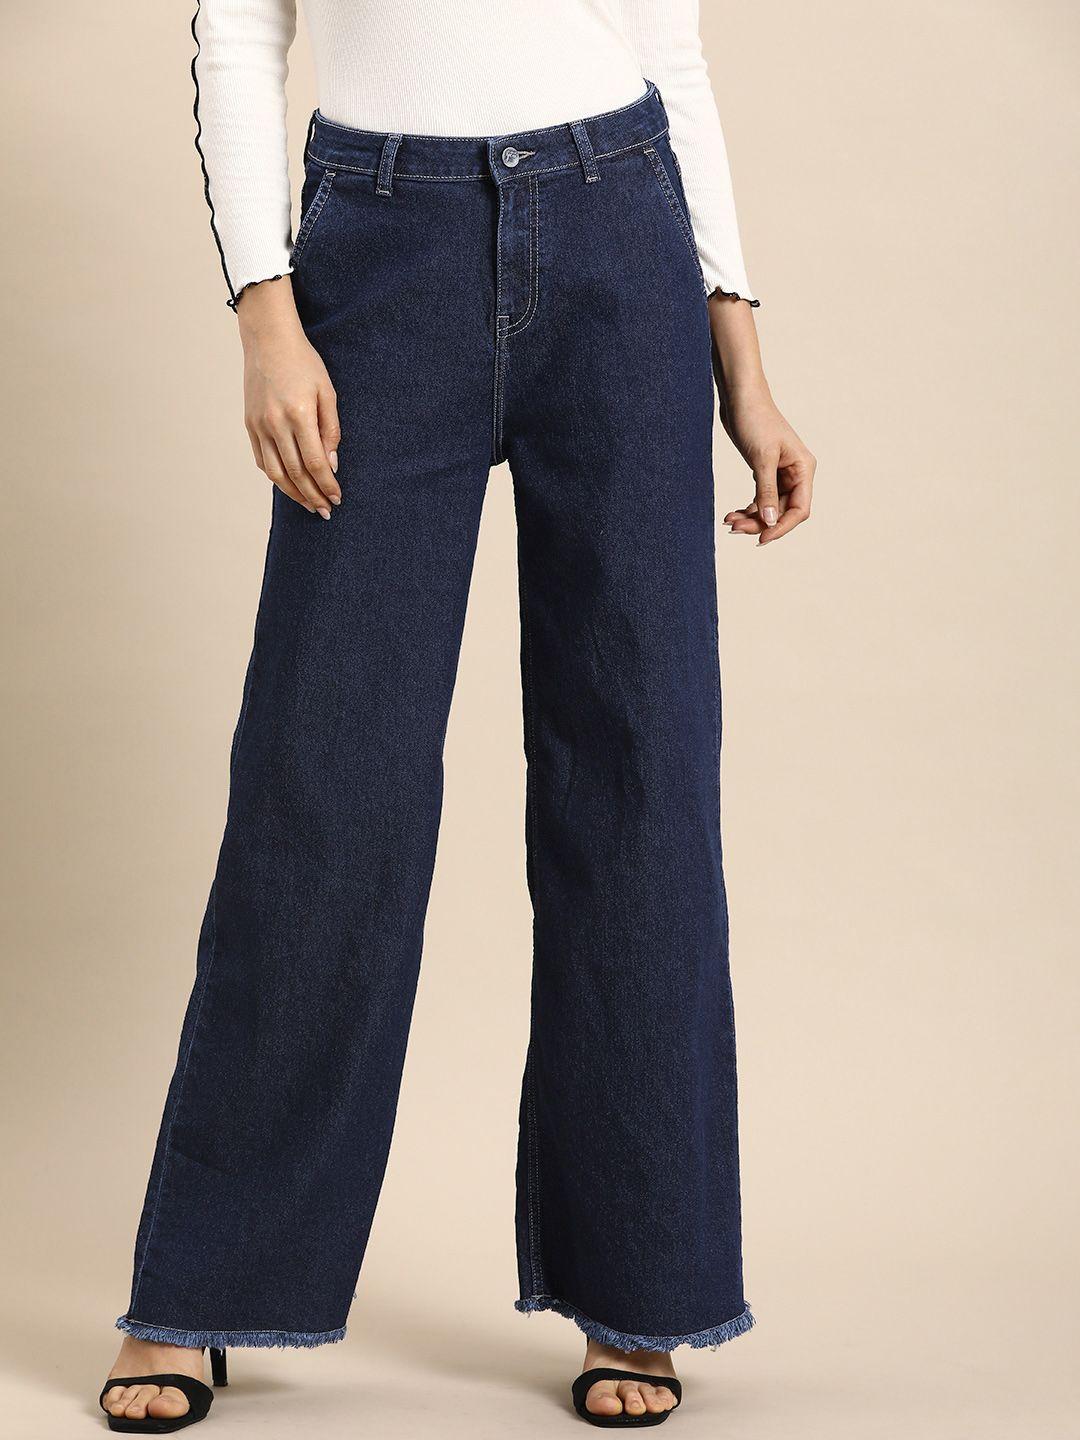 all-about-you-women-mid-rise-raw-hem-wide-leg-stretchable-jeans